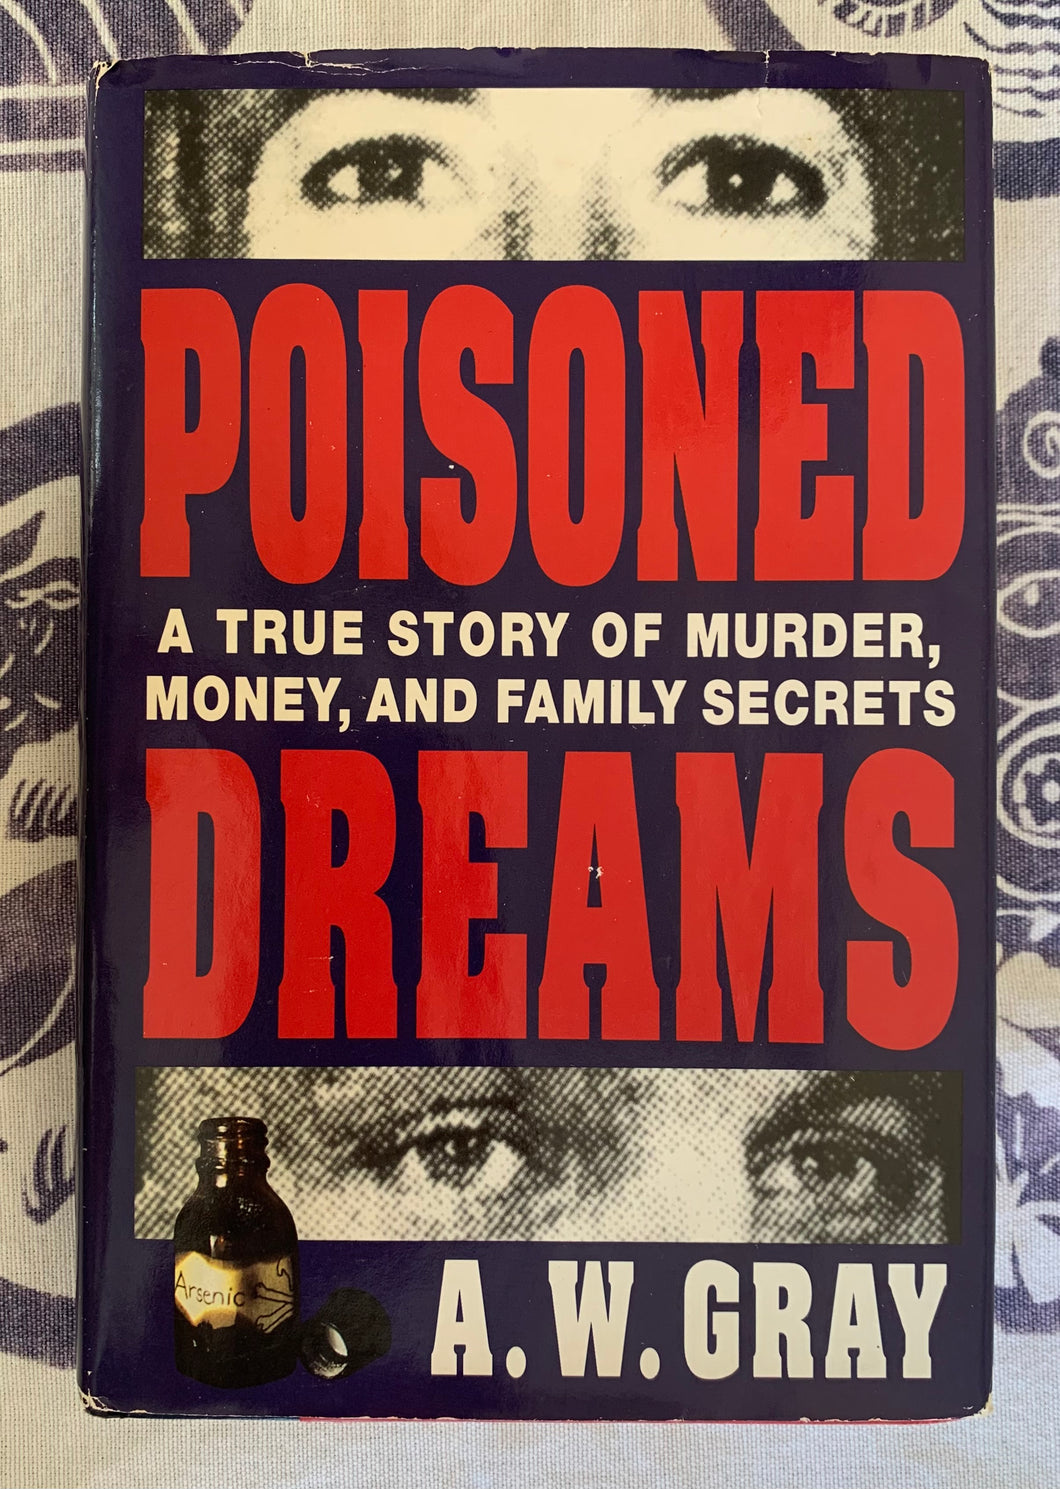 Poisoned Dreams: A True Story Of Murder, Money, And Family Secrets